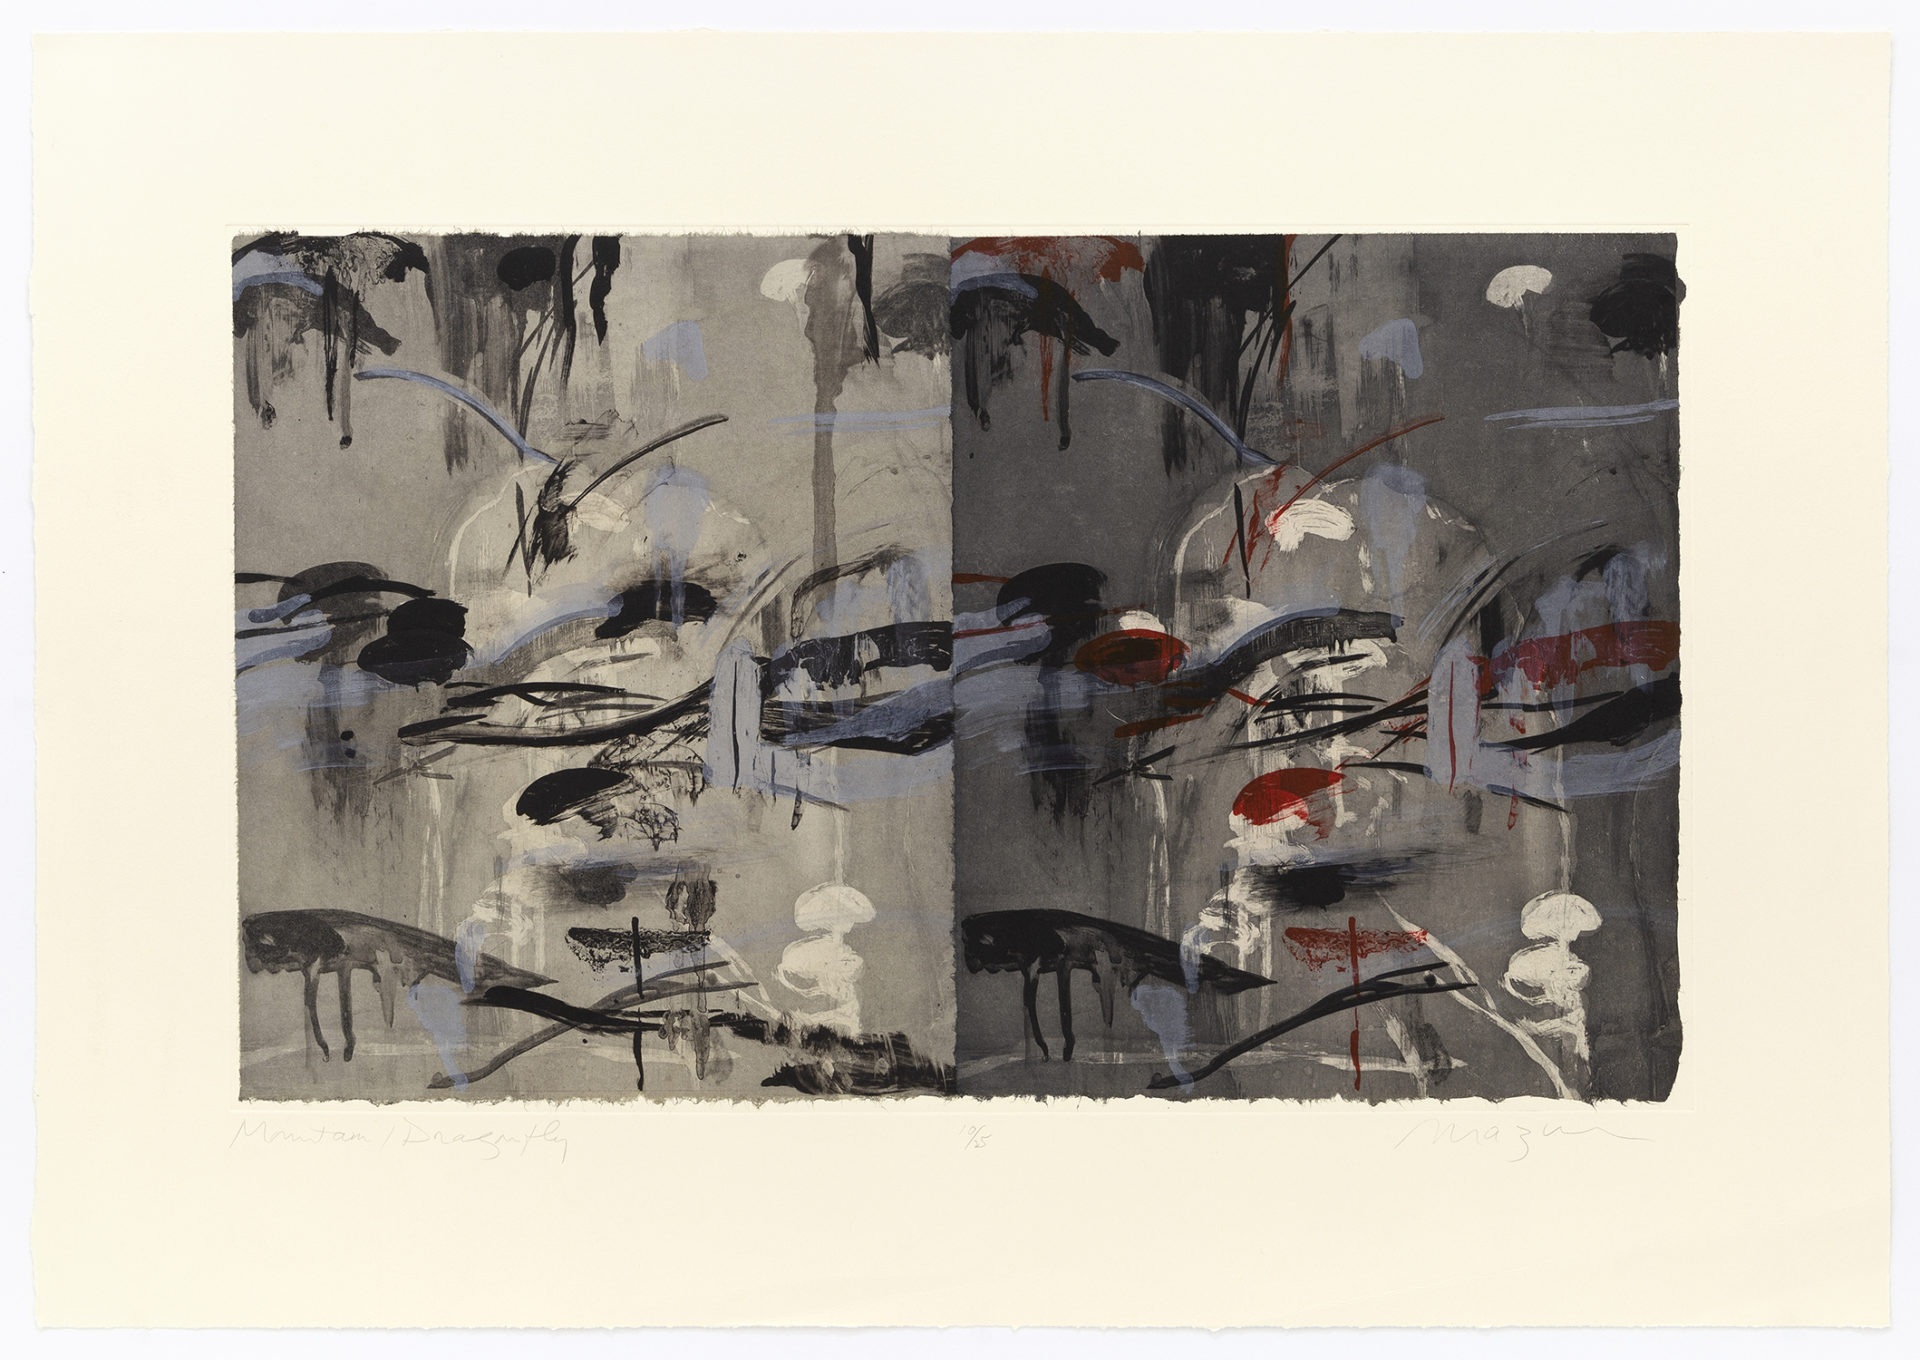 Dragonfly Mountain I, 1999, Intaglio, chine-collé, 27 x 38 inches (68.6 x 96.5 cm), Edition of 25